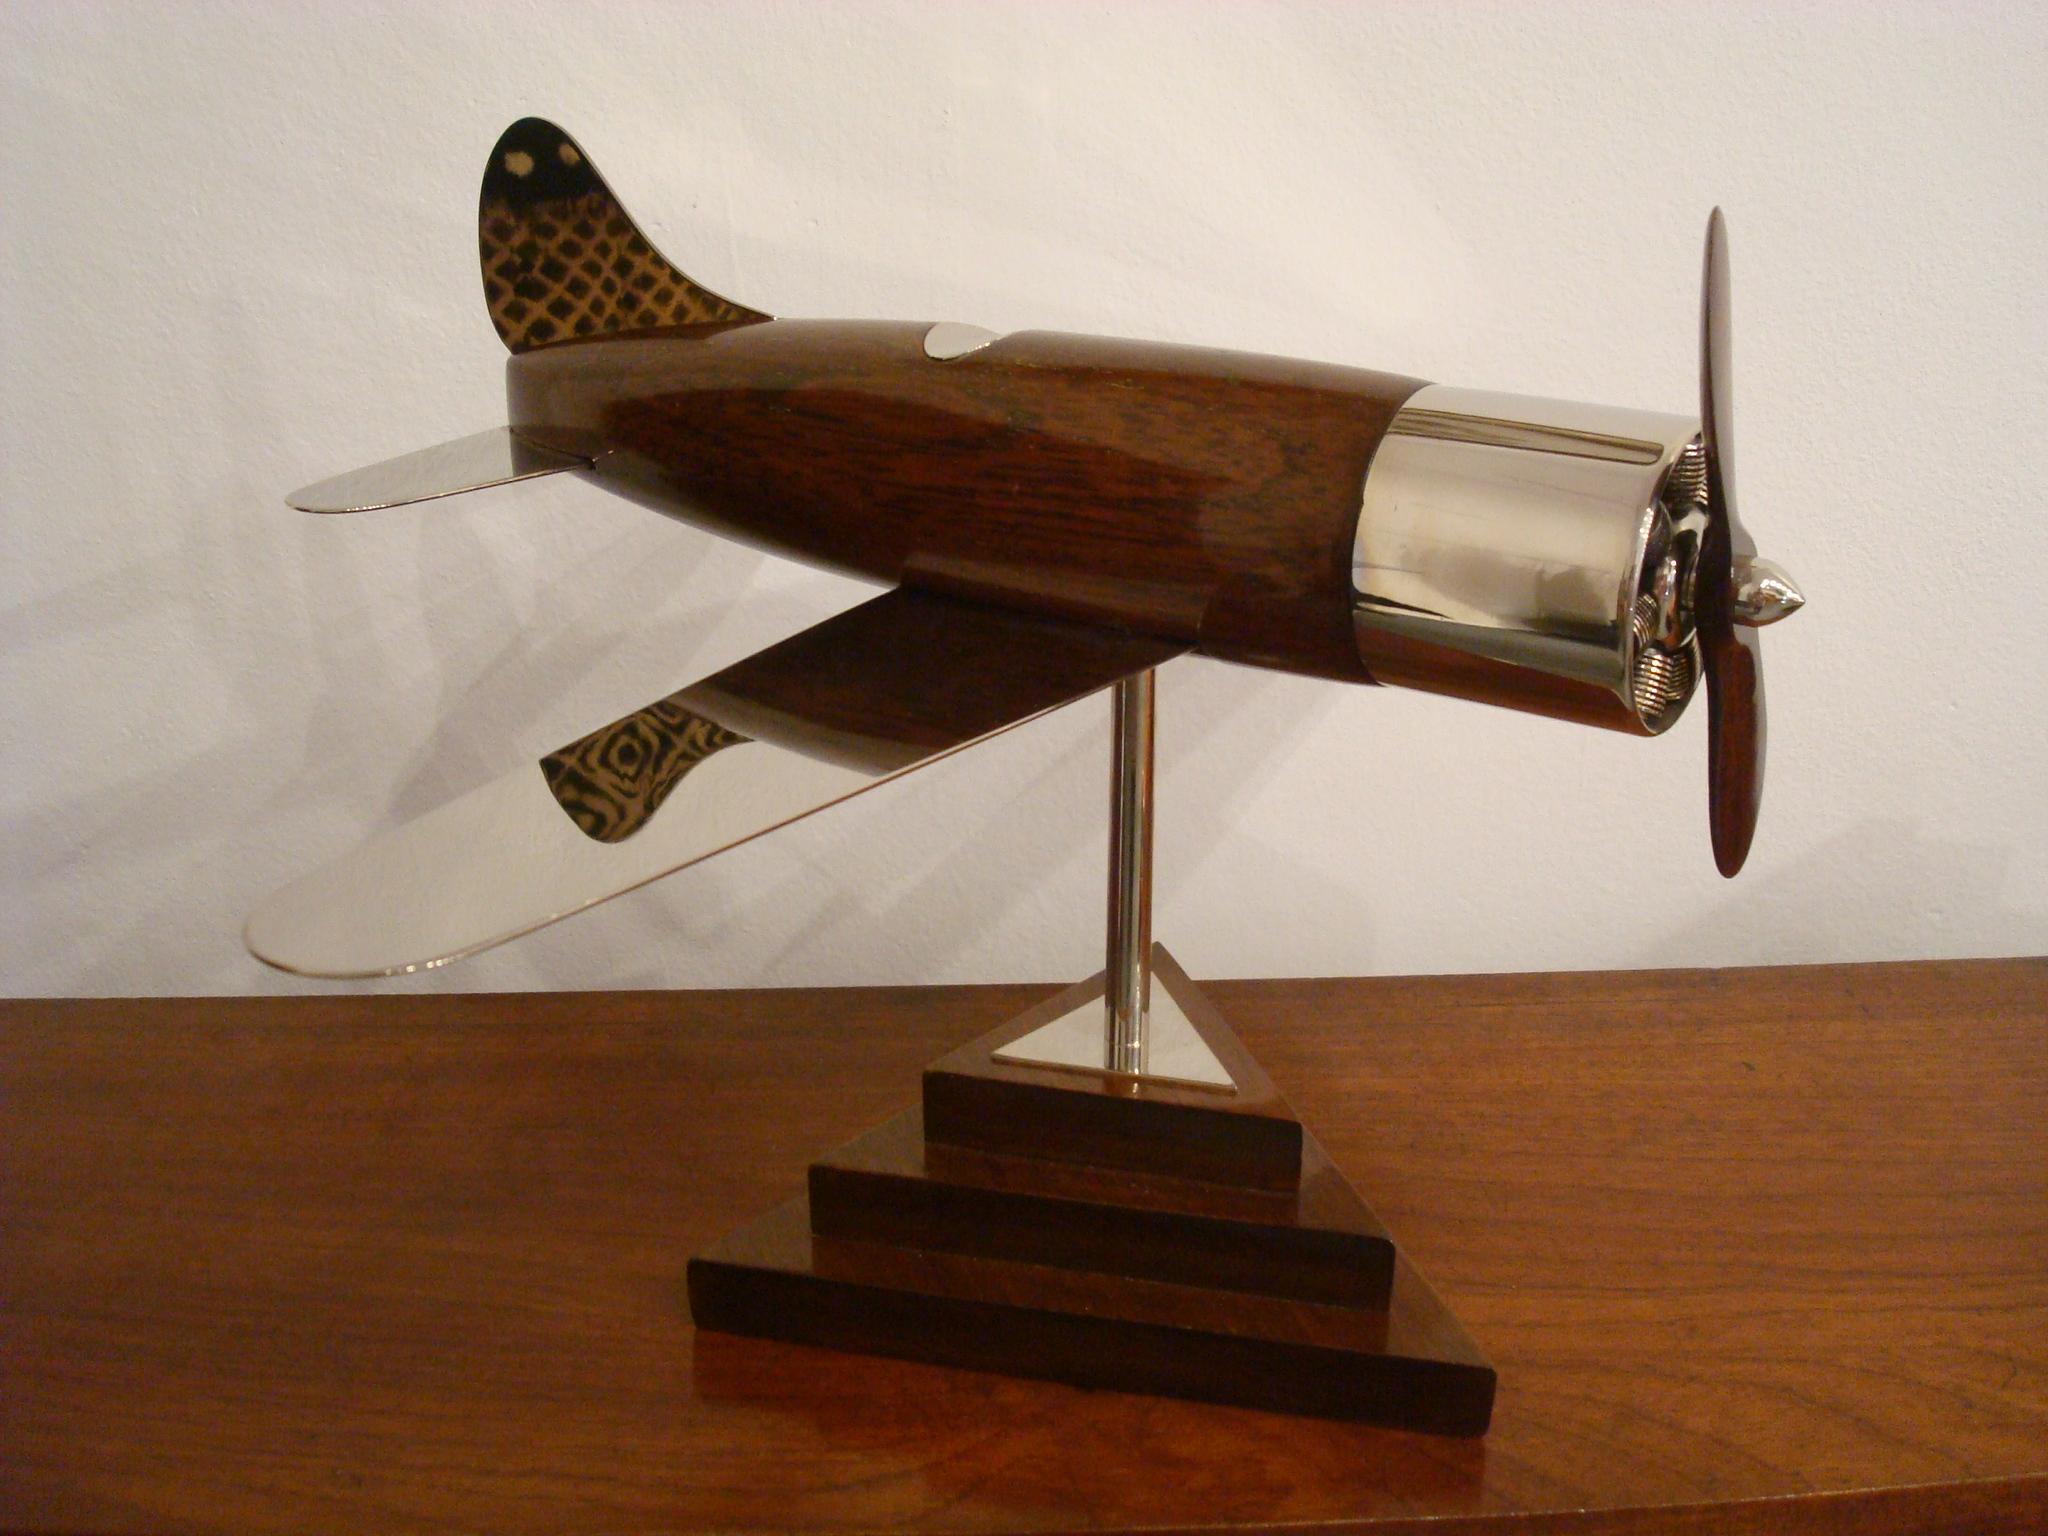 Very nice large 20th century, Art Deco streamline airplane wooden desk model sculpture. Perfect for any aviation fan. Made of wooden and silvered brass. Professional restoration has been made. Excellent conditions. Fantastic details in the engine.